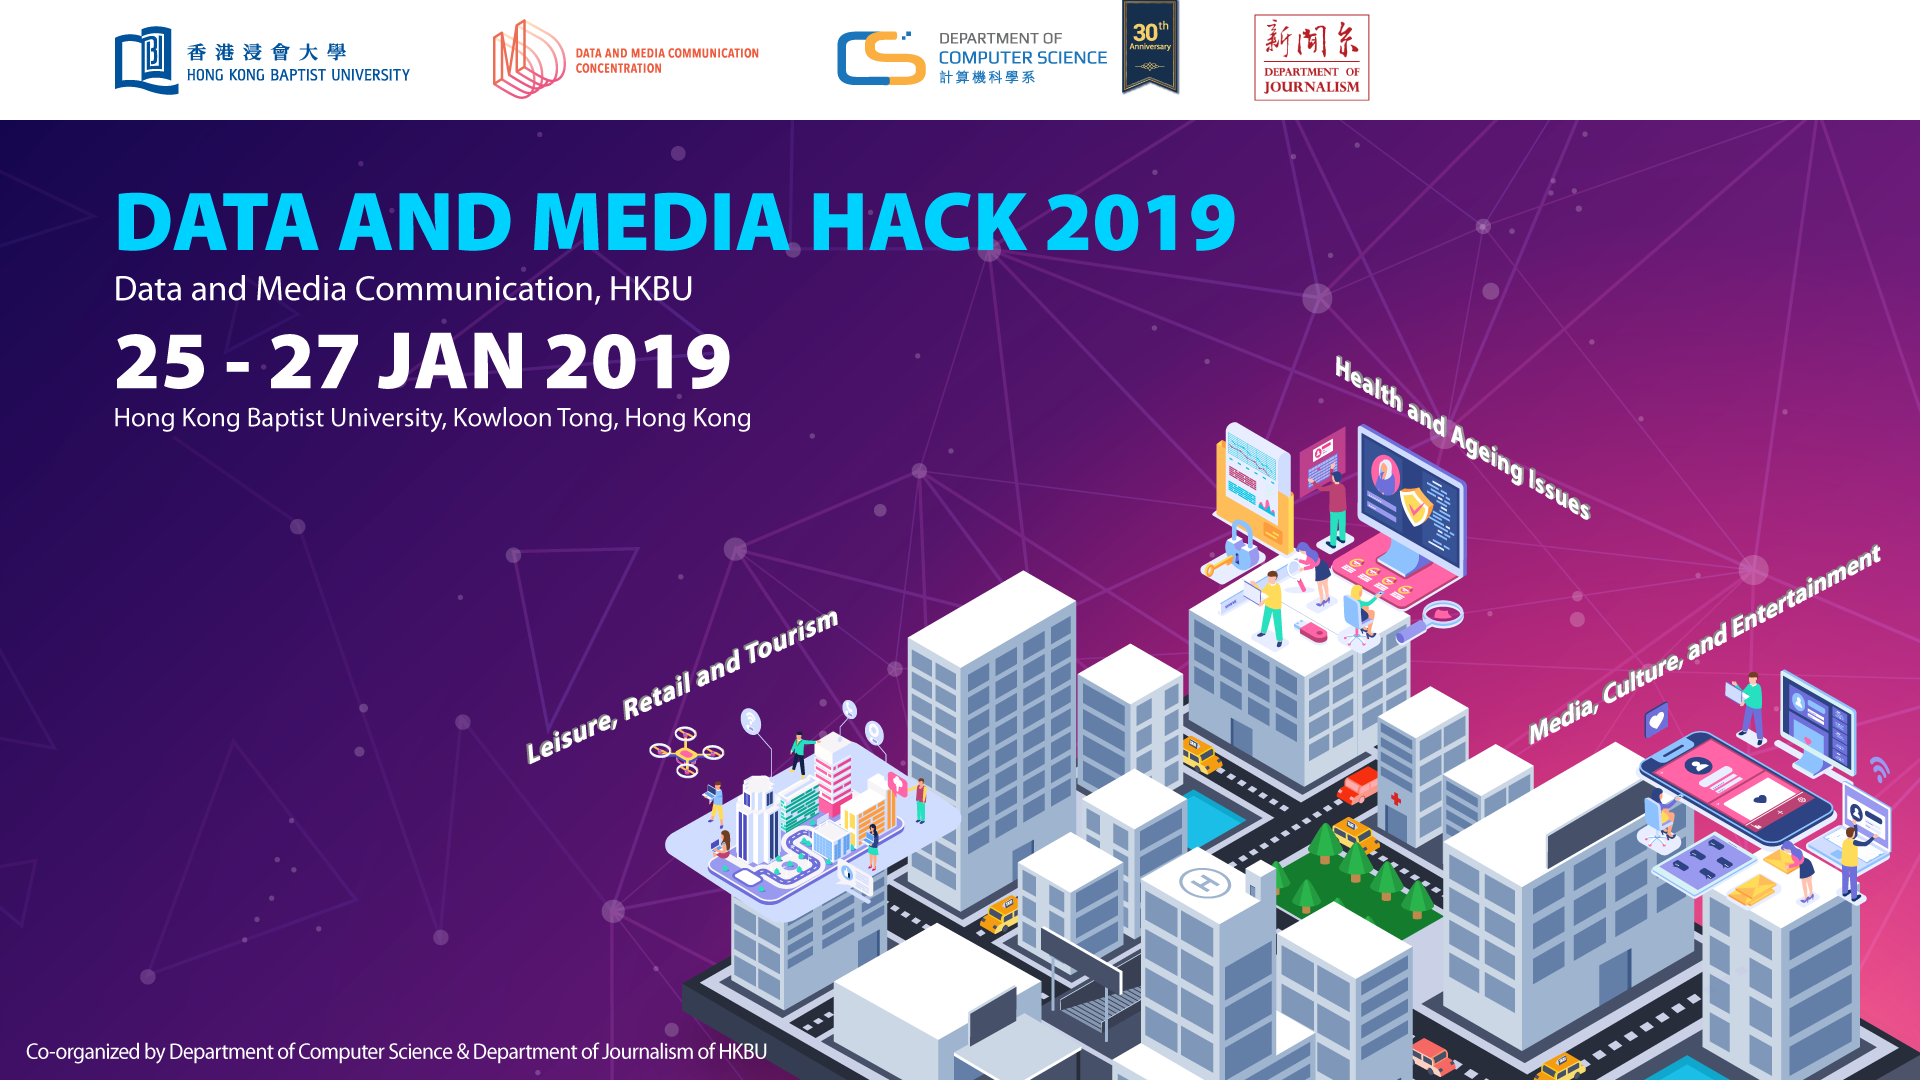 Data and Media Hack 2019